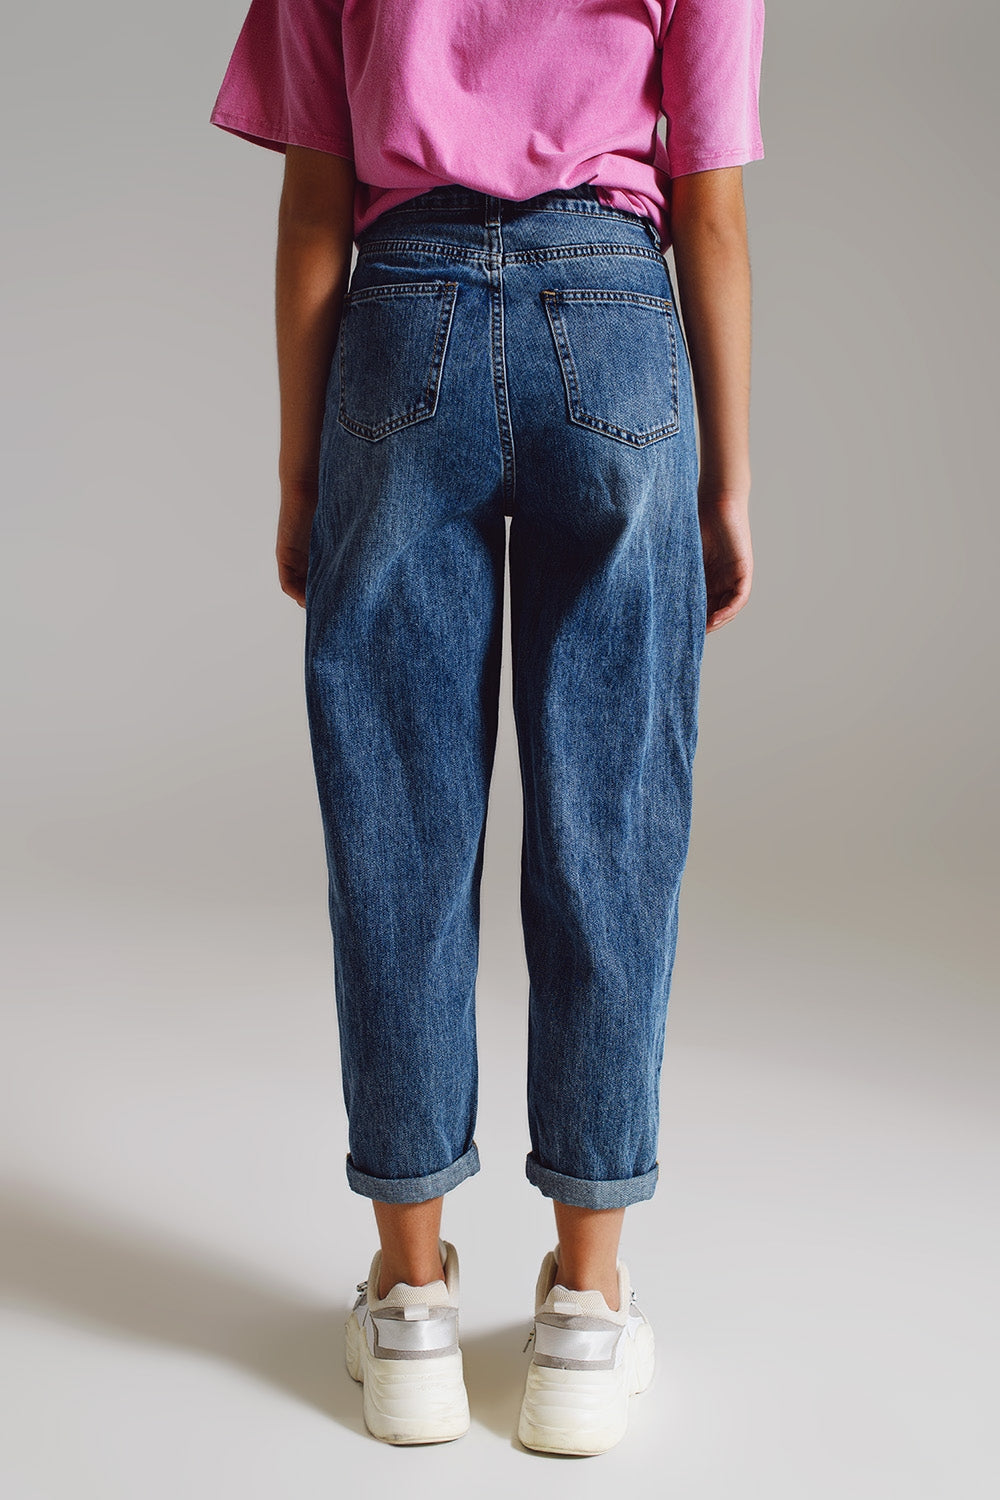 Medium washed high-rise mom style jeans